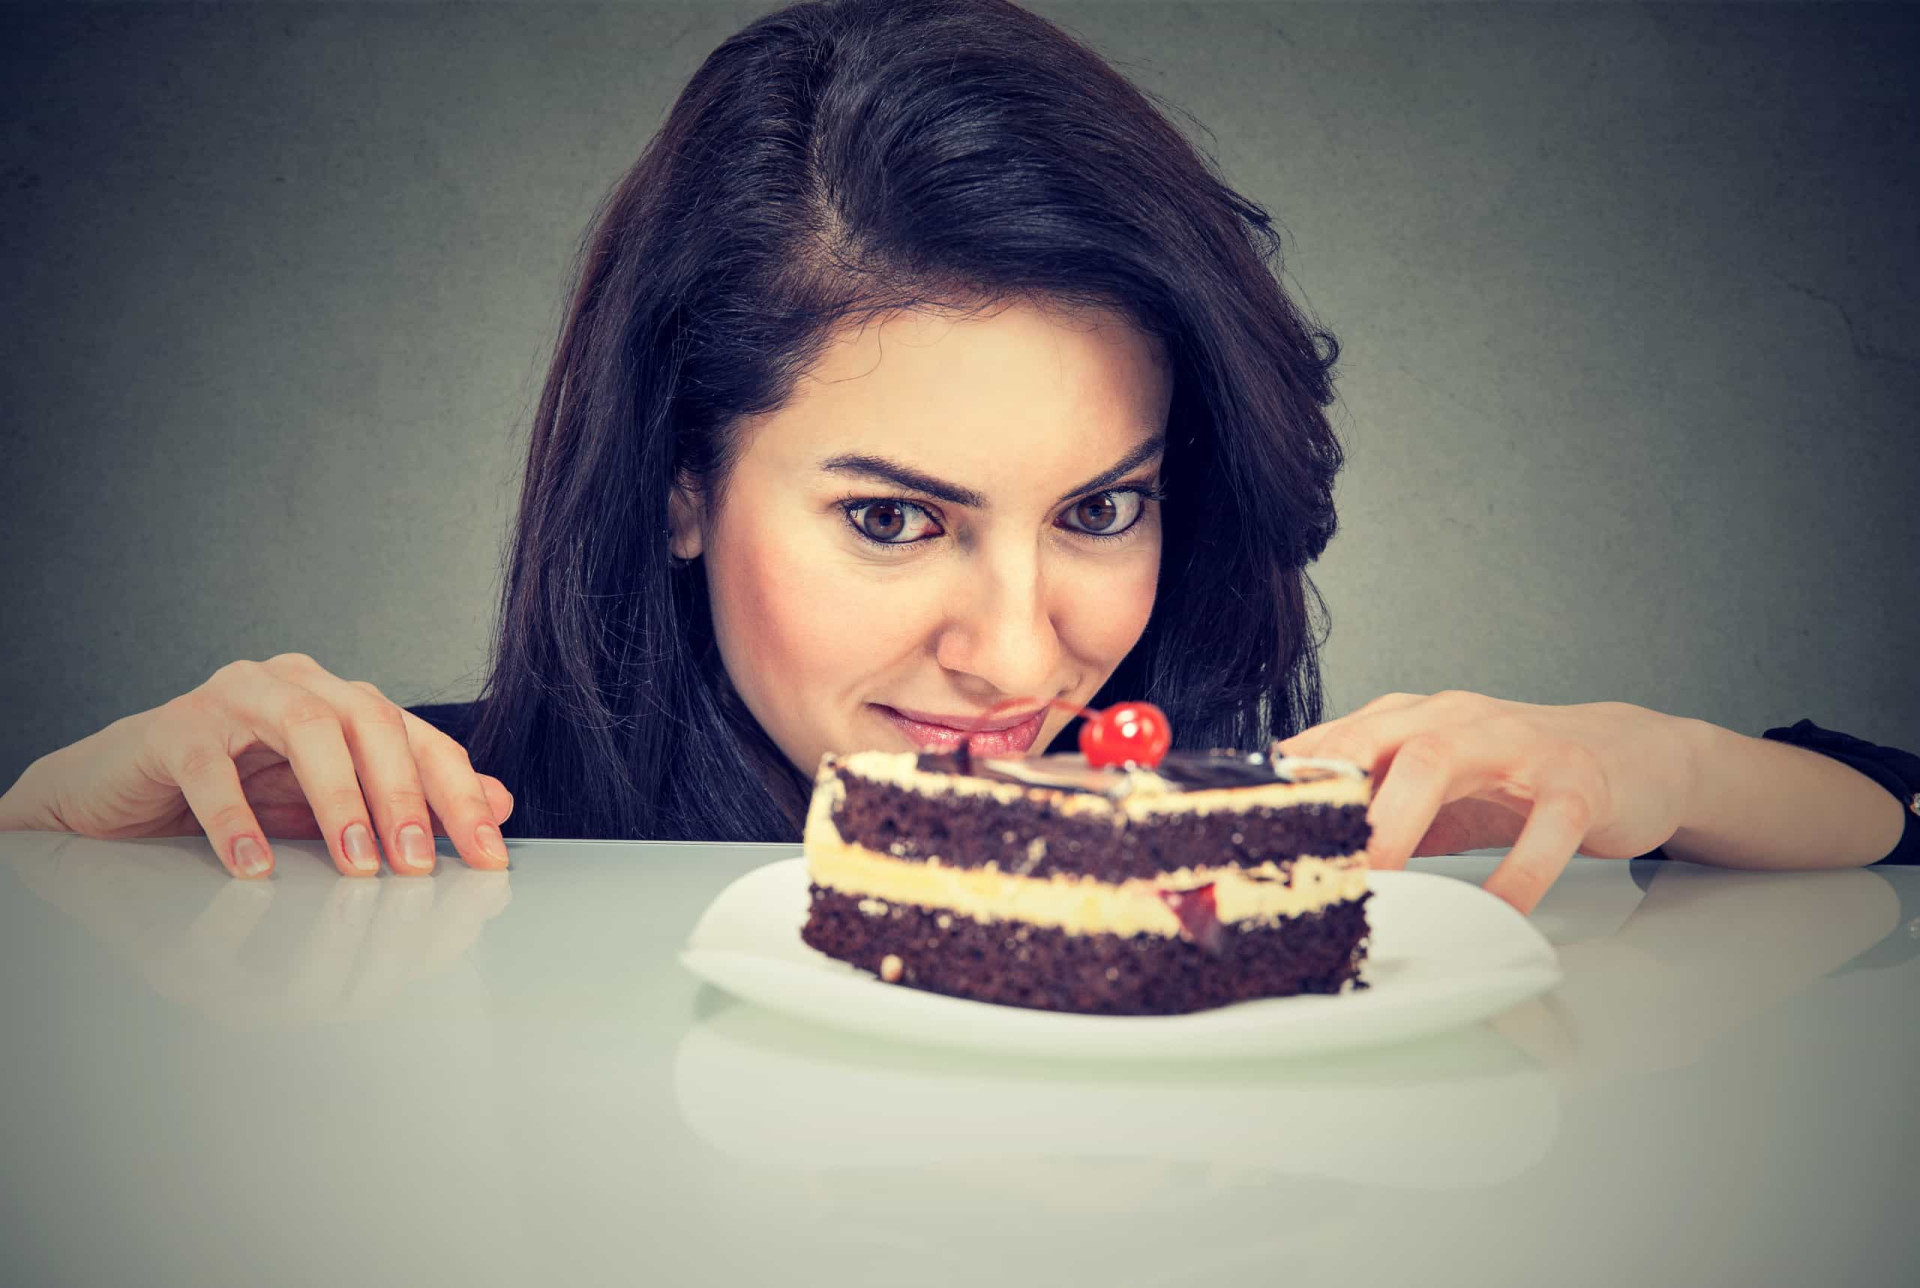 <p>There are many similarities between the two, but ultimately one can still be addicted to a particular food and not binge on it.</p><p>You may also like:<a href="https://www.starsinsider.com/n/459208?utm_source=msn.com&utm_medium=display&utm_campaign=referral_description&utm_content=508078en-en"> Backup singers who became famous</a></p>